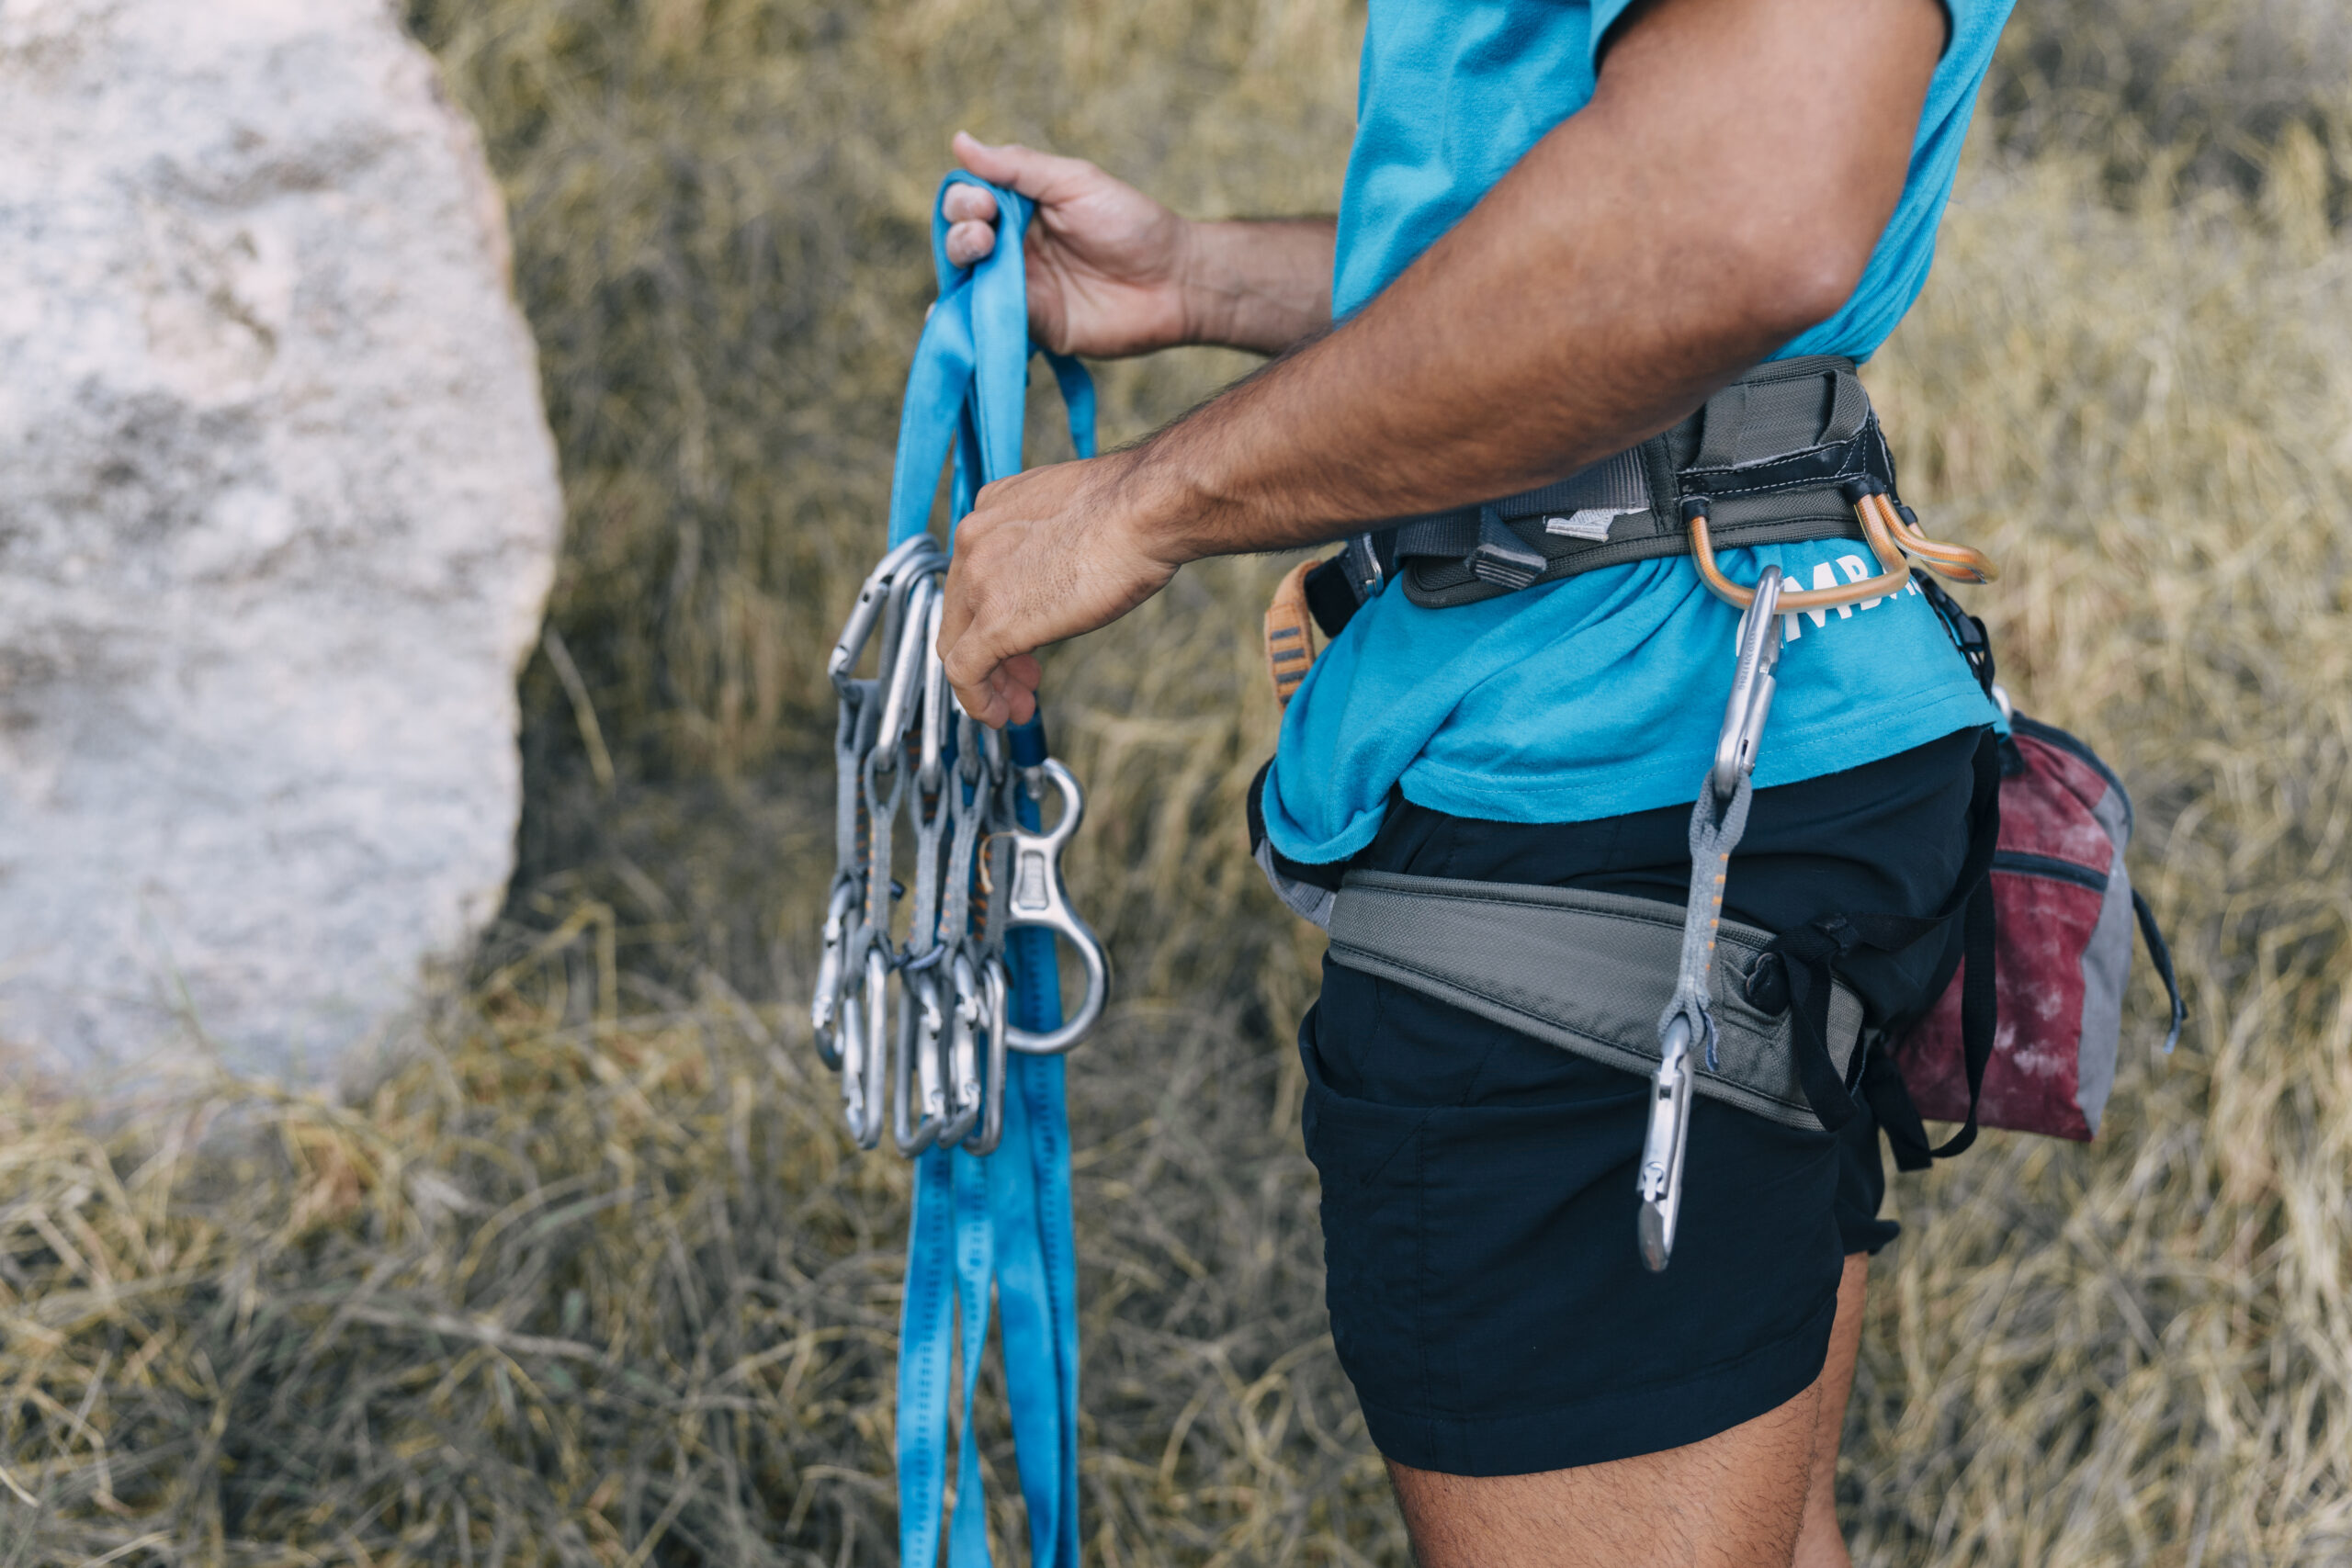 A close-up of a person's hands checking their rappelling equipment, including the rope, harness, carabiners, and rappel device, to ensure they are secure and functioning correctly.